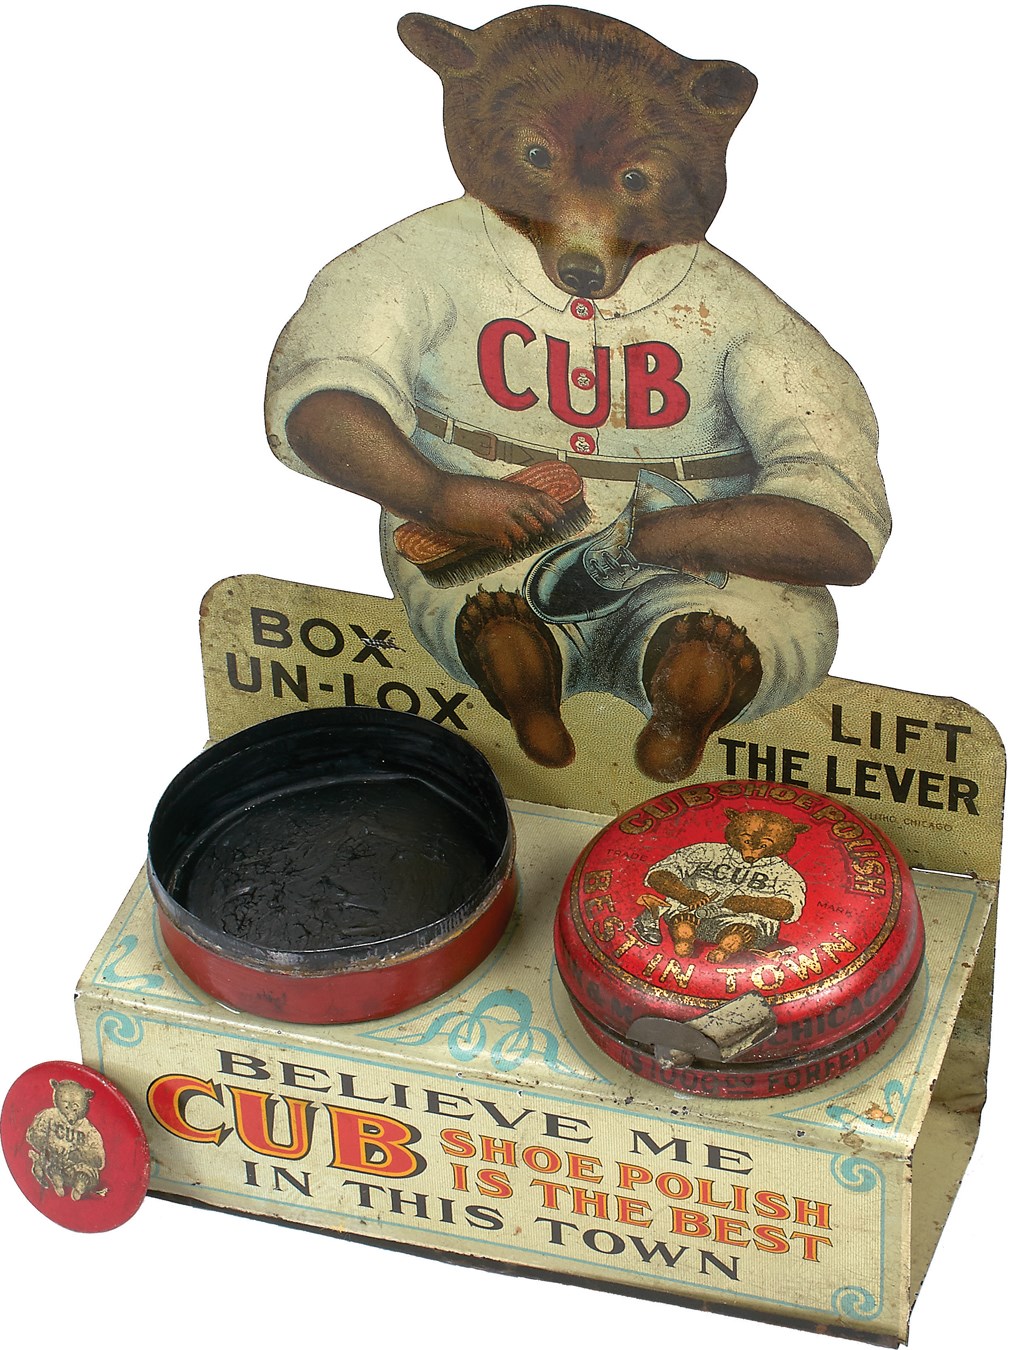 Chicago Cubs & Wrigley Field - Amazing Circa 1907 Chicago Cubs Shoe Polish Tin Store Display